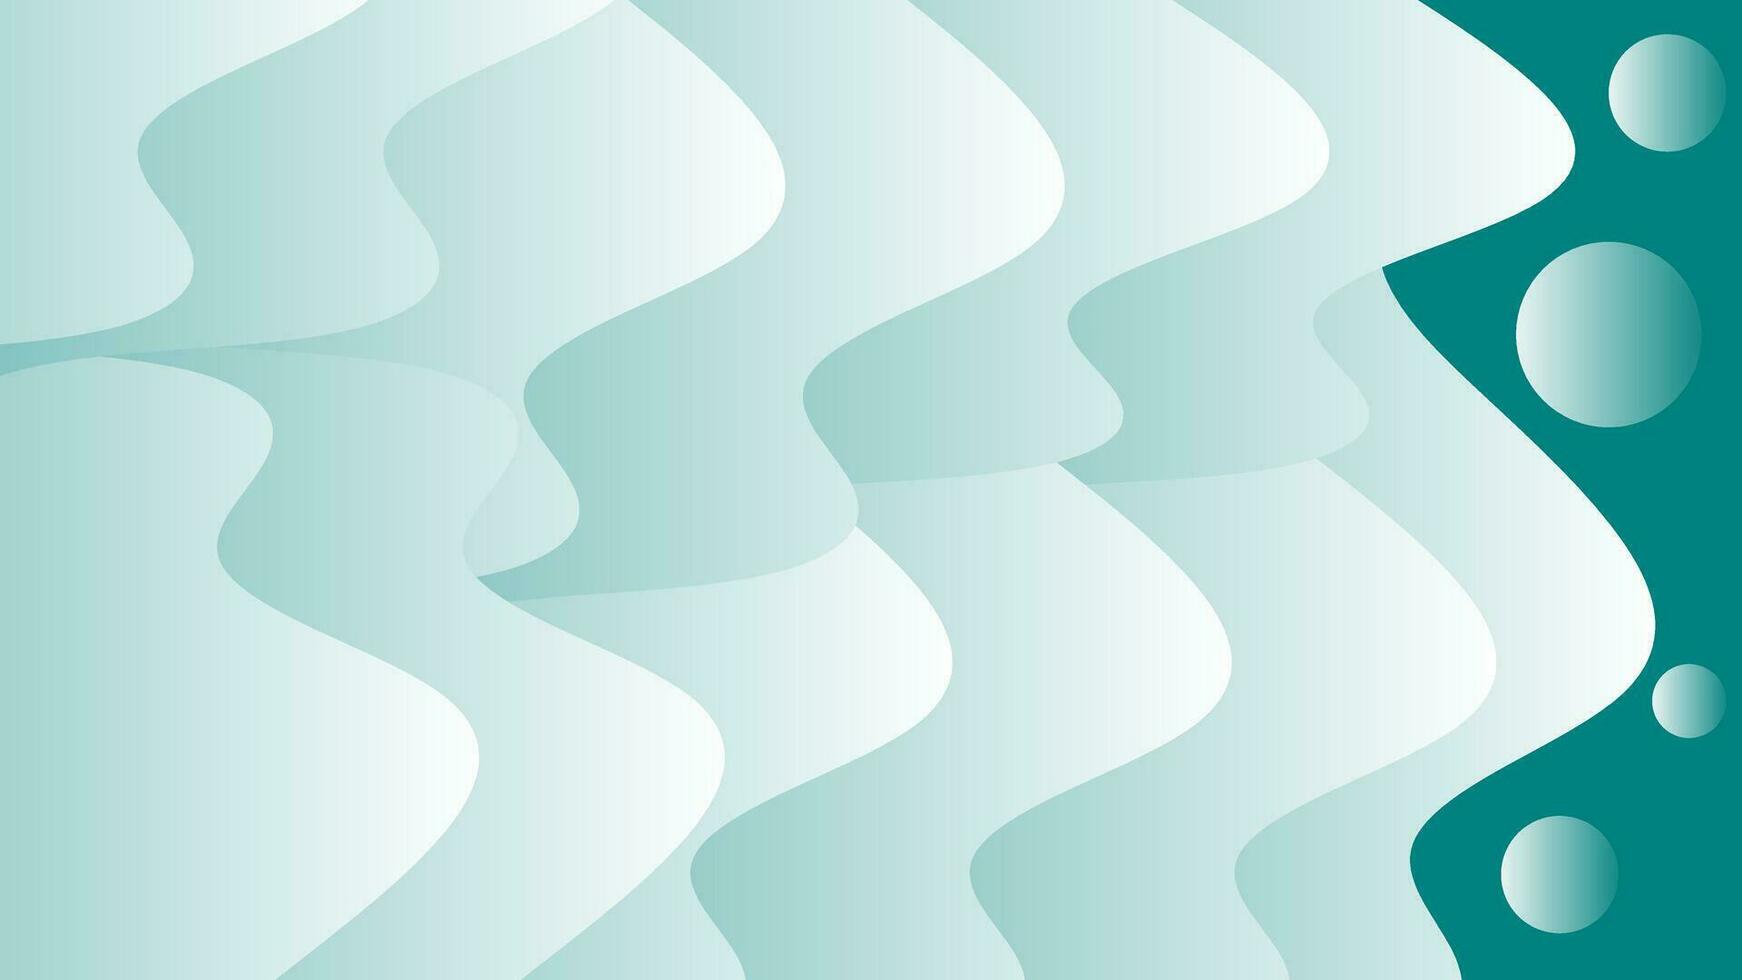 Abstract wave background suitable for desktop wallpaper and so on vector